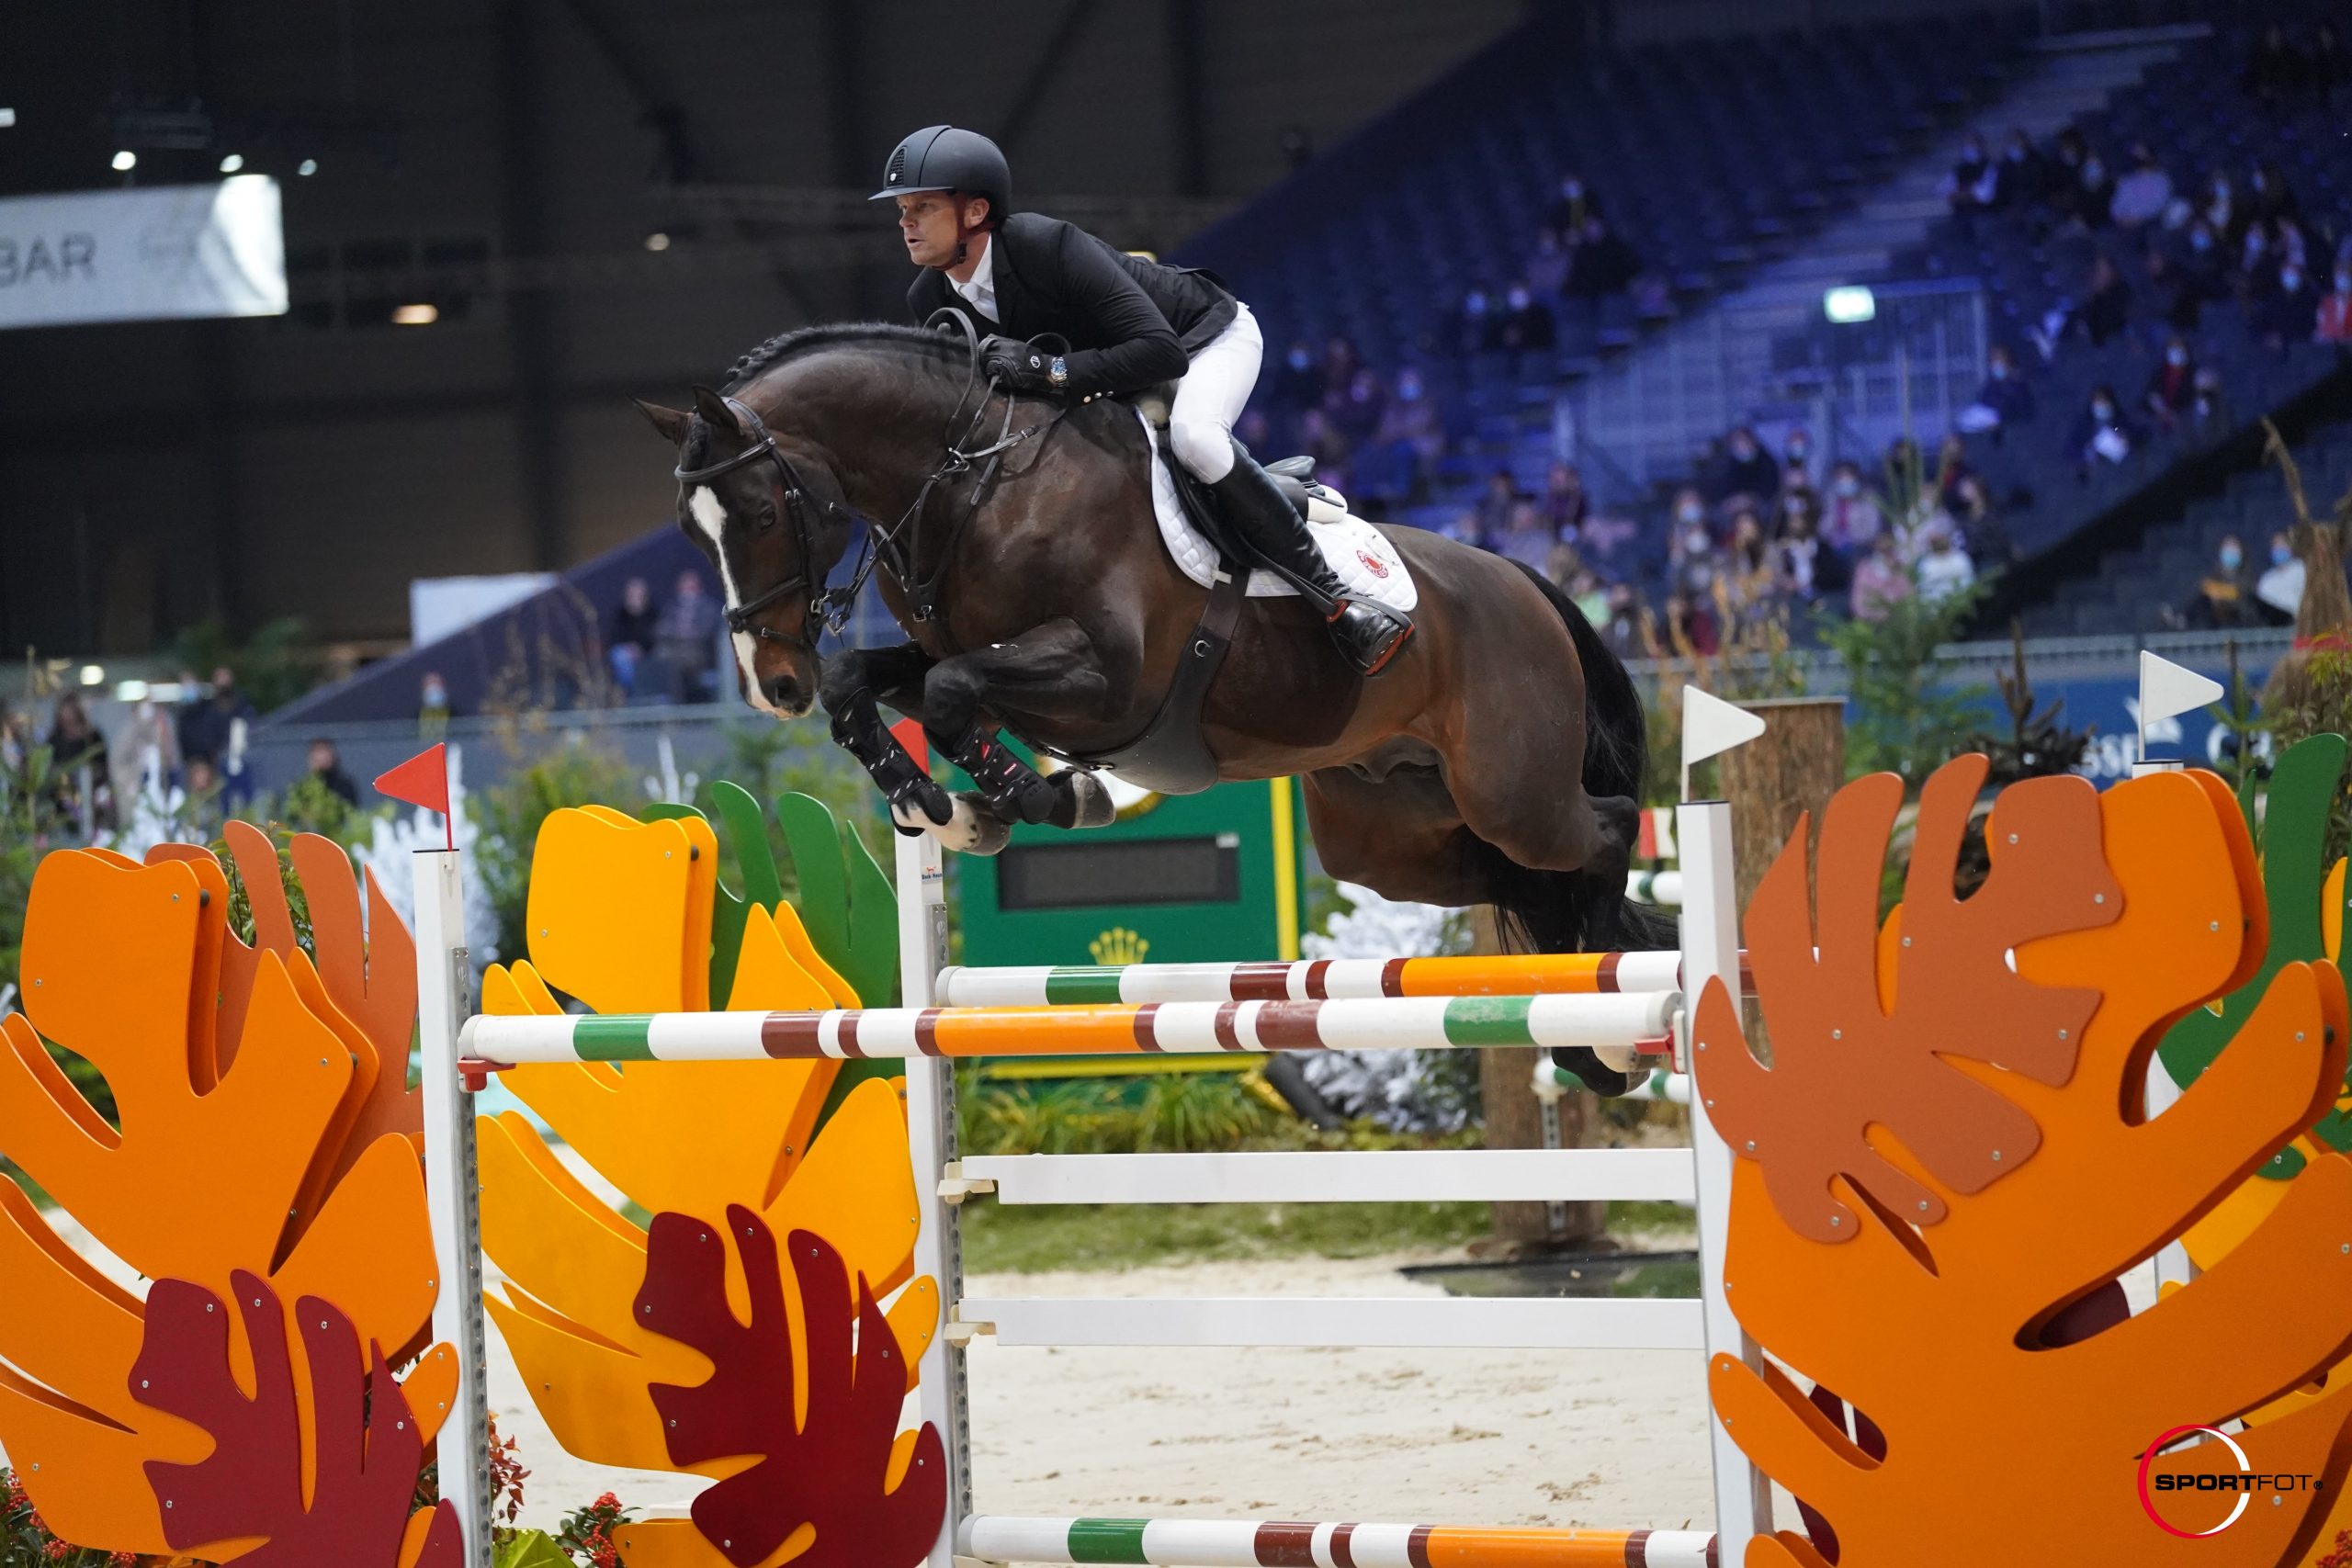 Reference Quel Homme de Hus with another exceptional round in the 1.60m class at Geneve